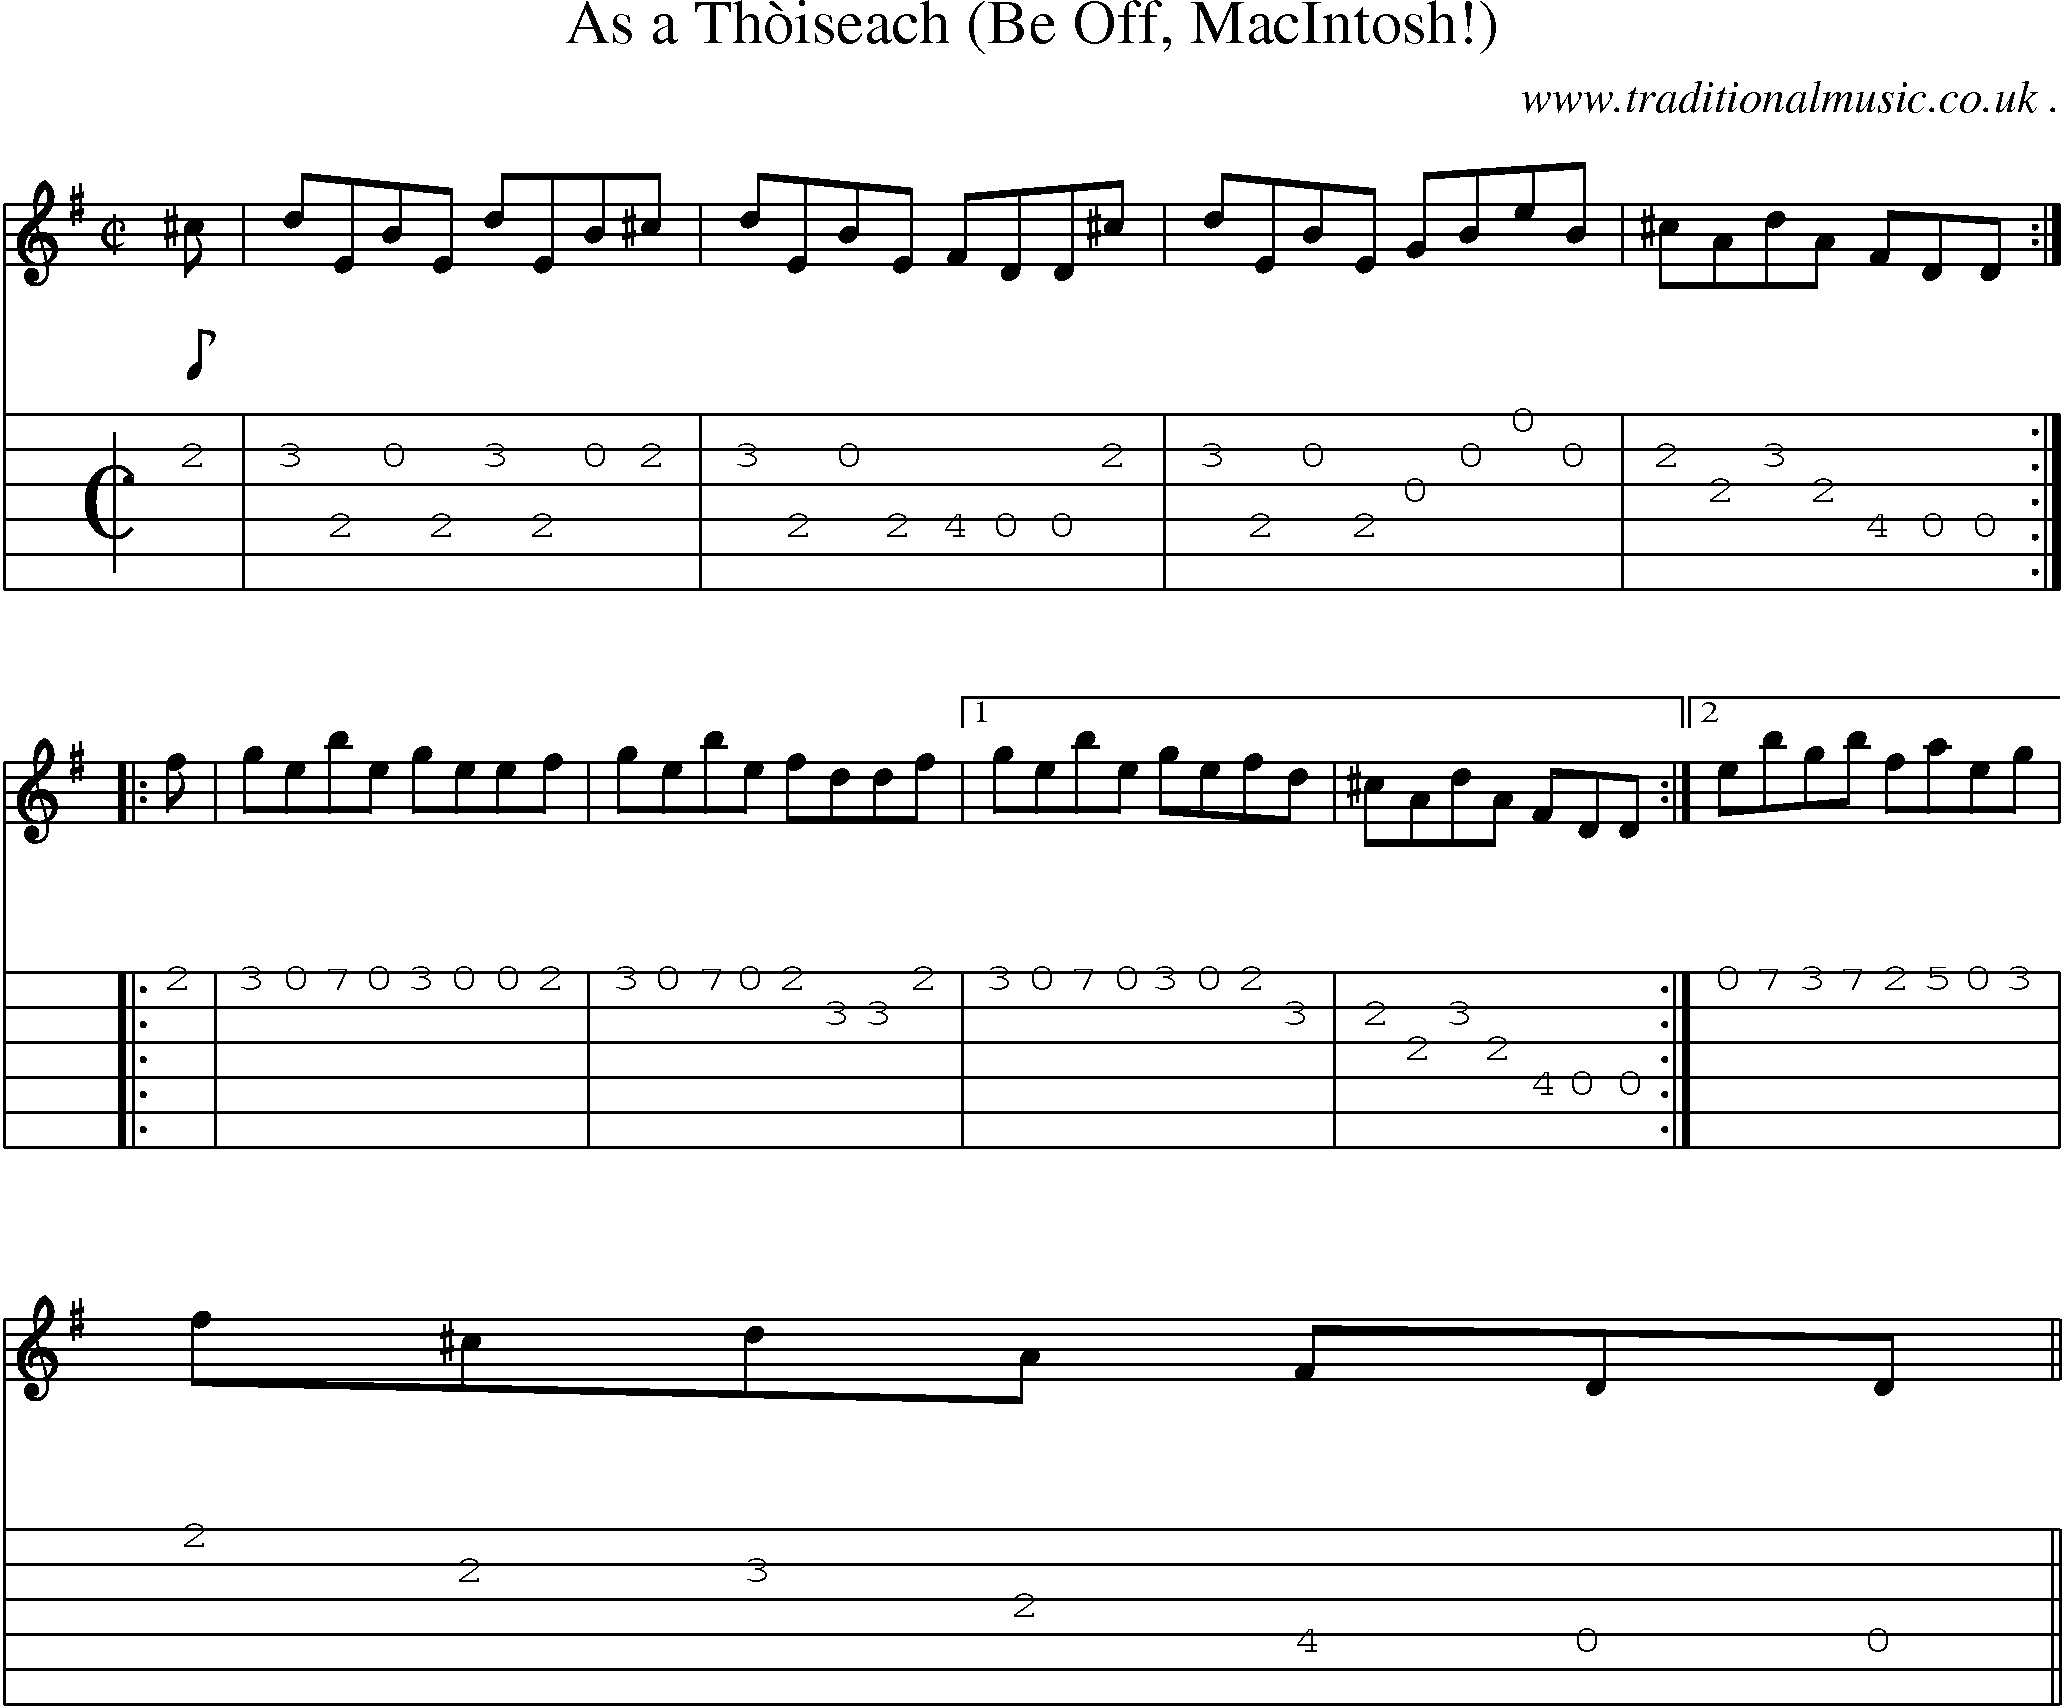 Sheet-music  score, Chords and Guitar Tabs for As A Thoiseach Be Off Macintosh!